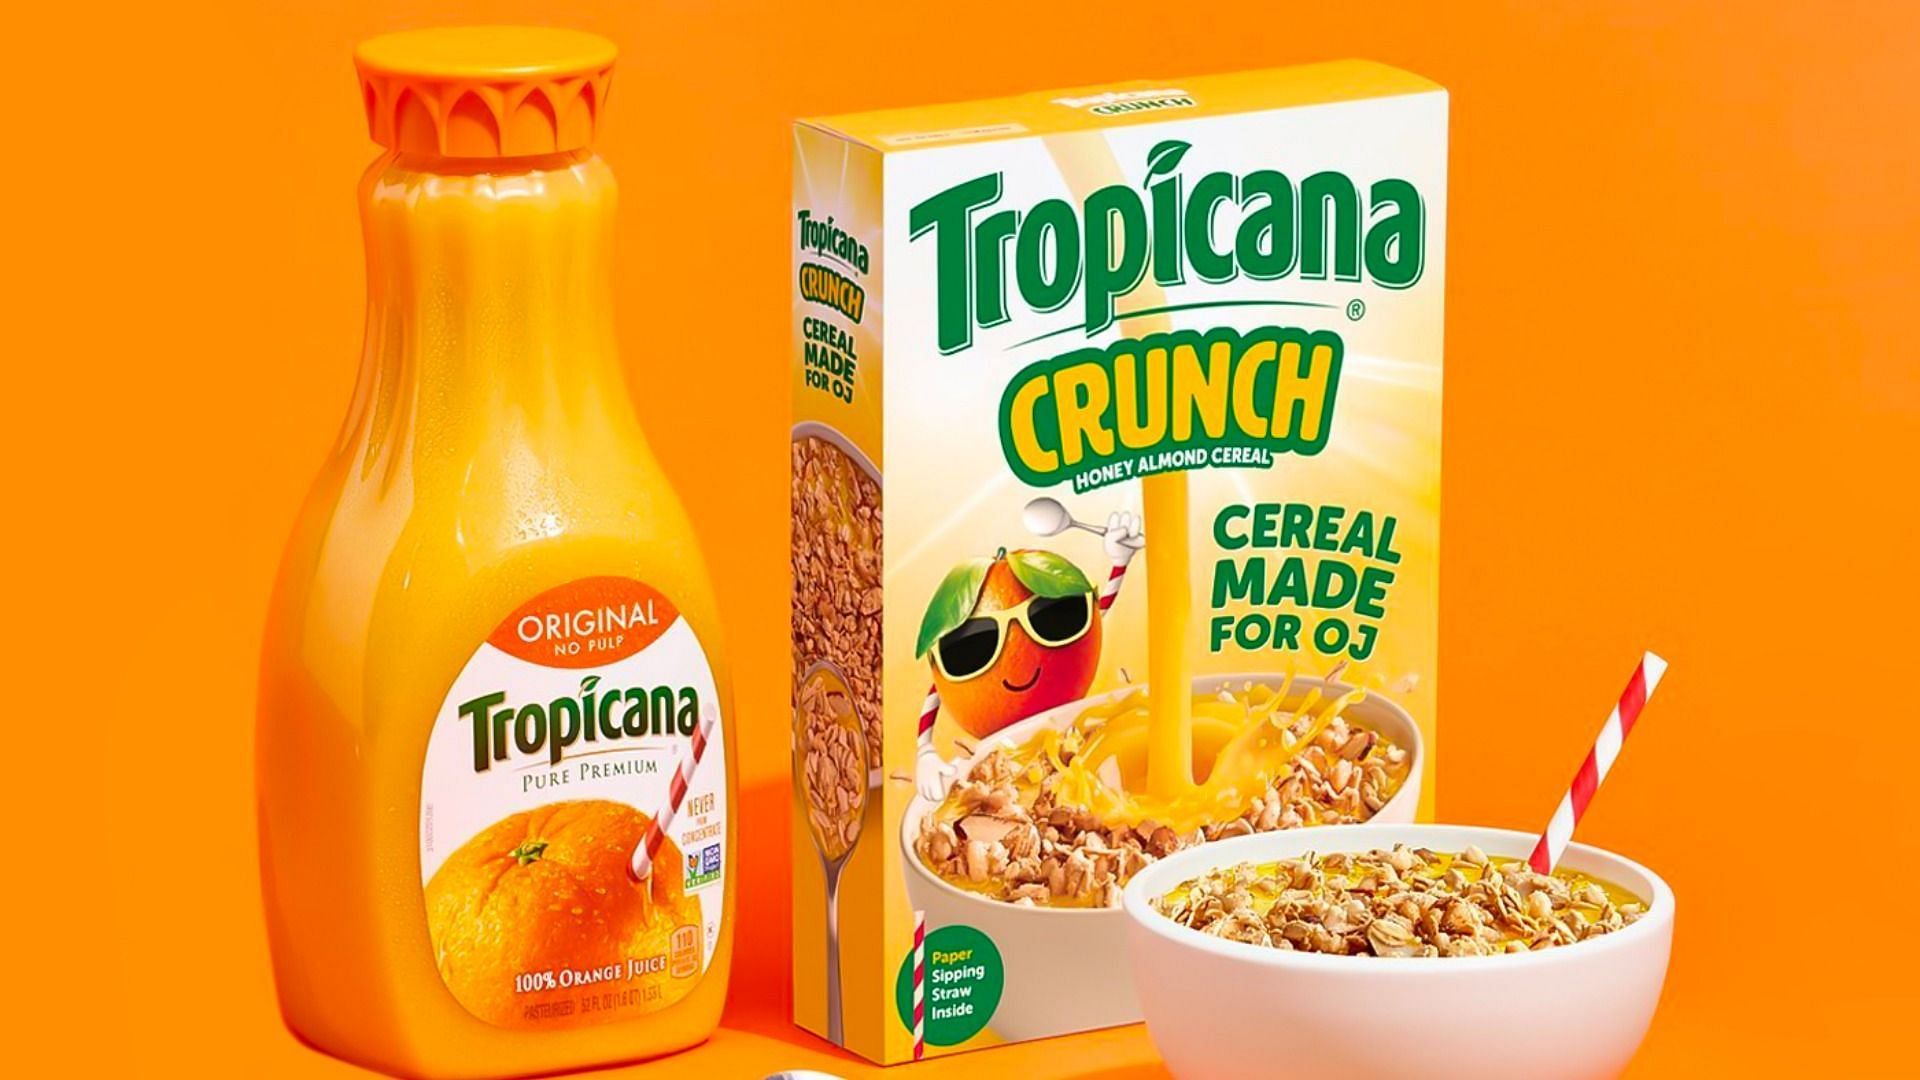 The juice brand announces a special cereal meant to be paired with orange juice (Image via Tropicana)